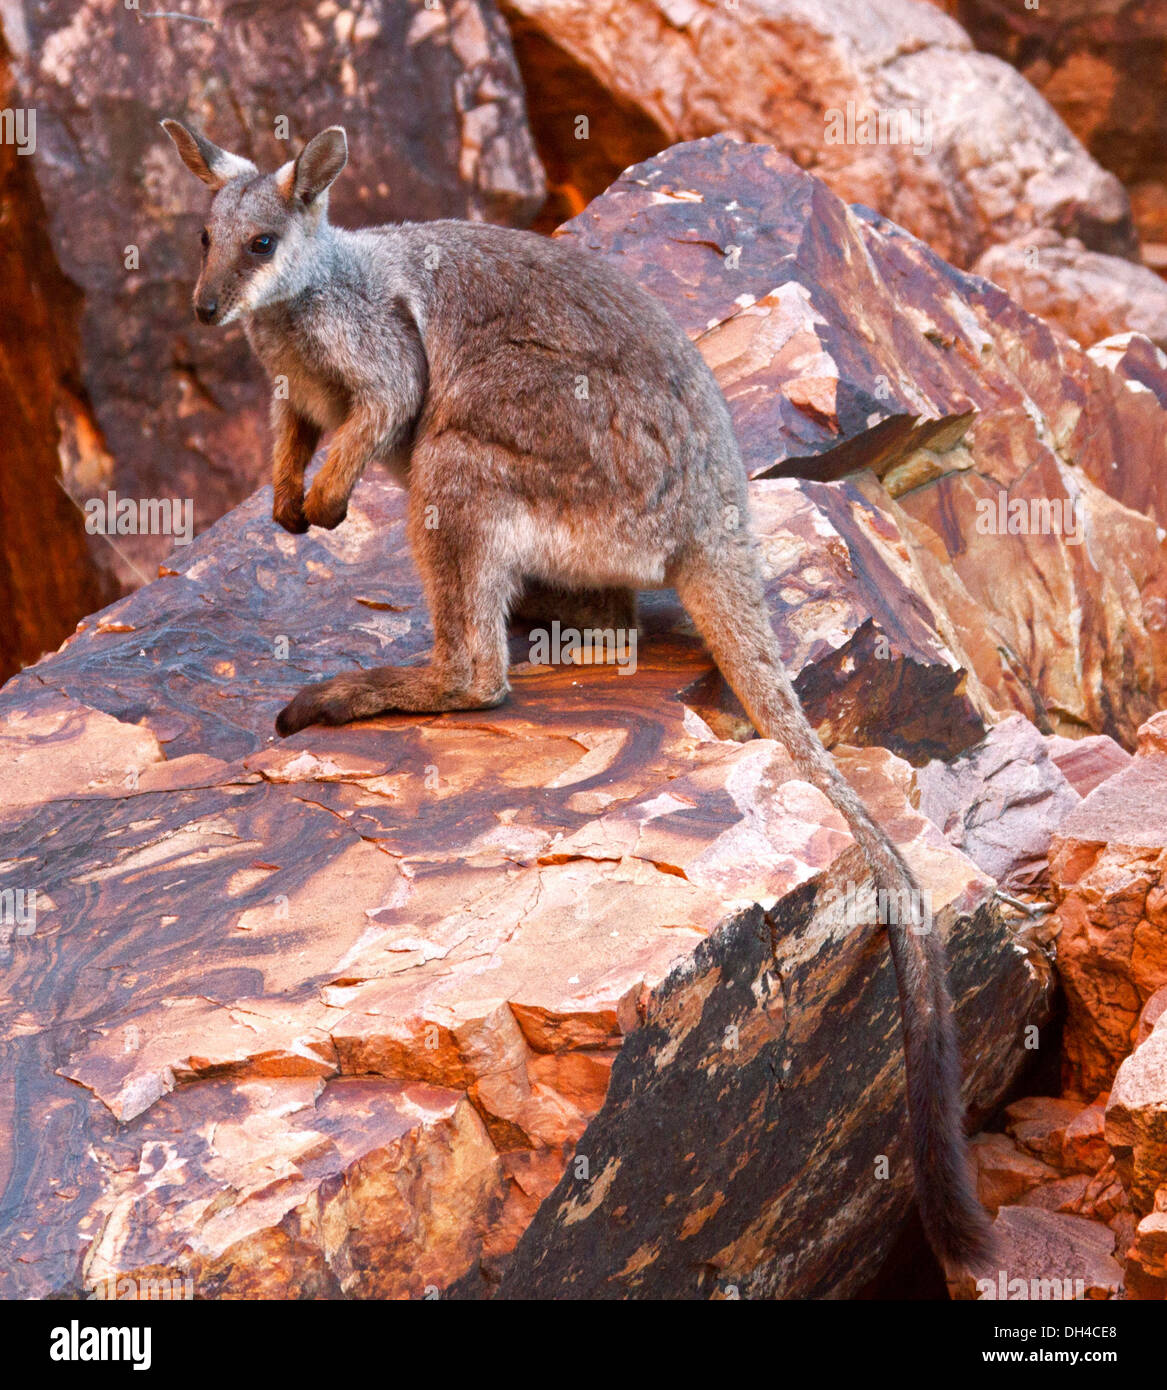 Rare black-footed rock wallaby Petrogale lateralis on rocks in the wild at Simpson's Gap in West MacDonnell Ranges near Alice Springs NT Australia Stock Photo